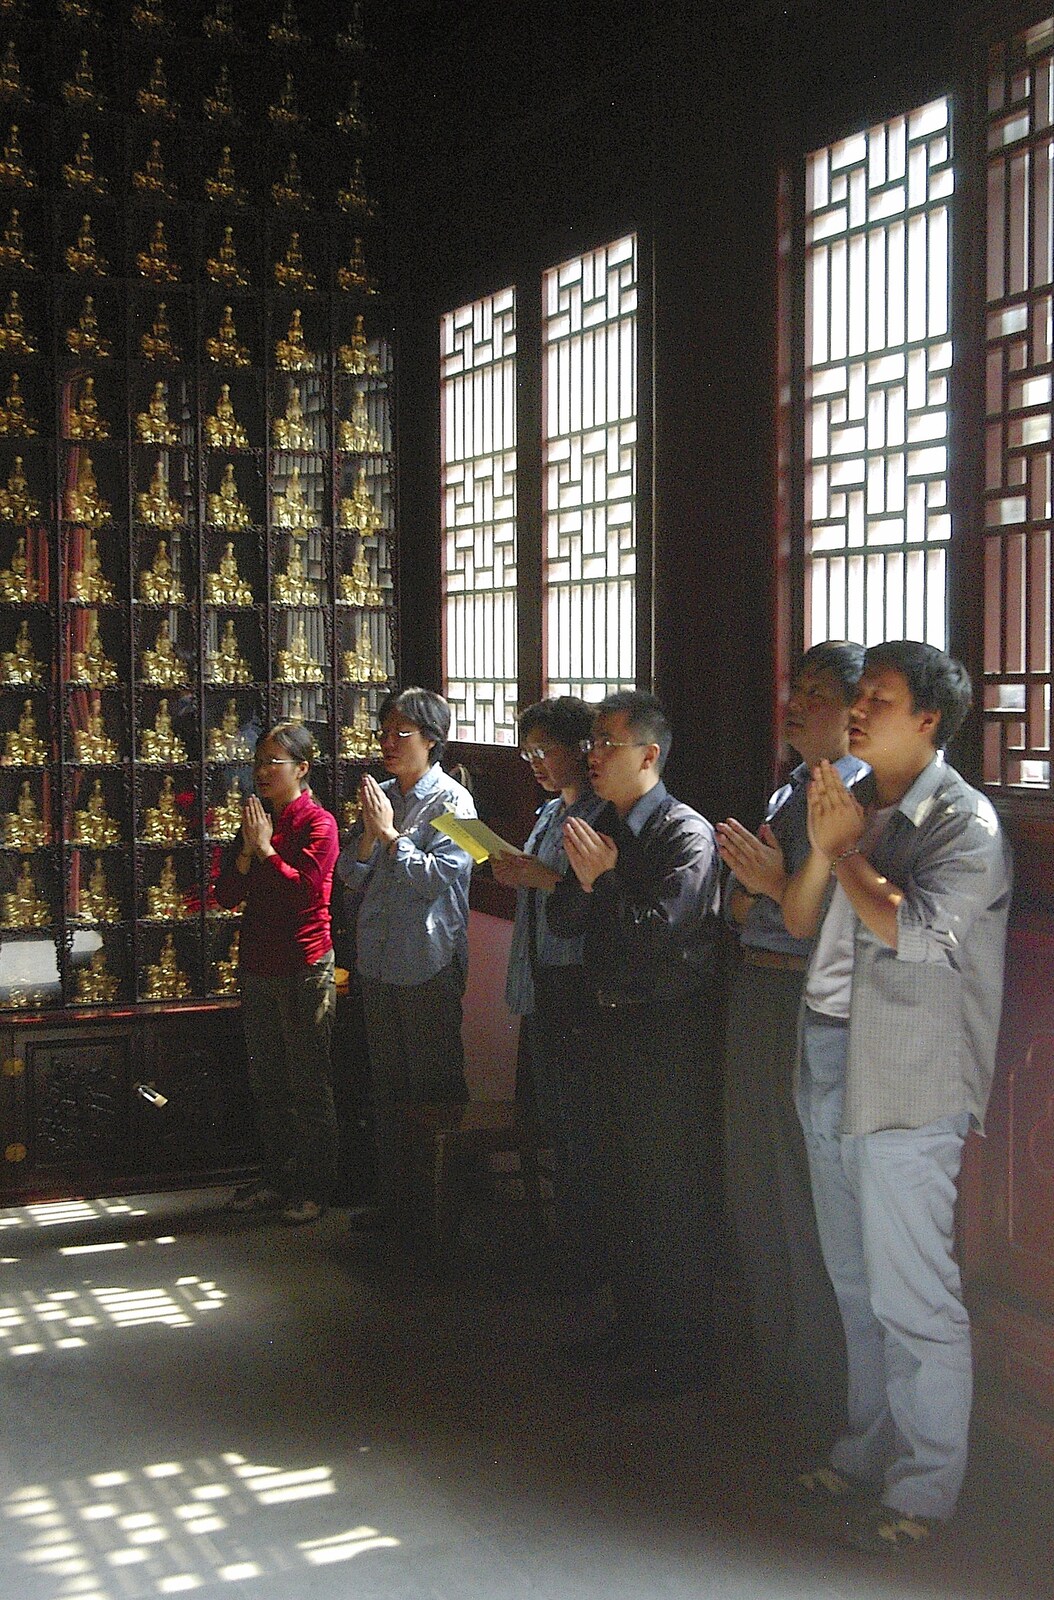 Local Buddhists chant and pray from A Few Days in Nanjing, Jiangsu Province, China - 7th October 2006